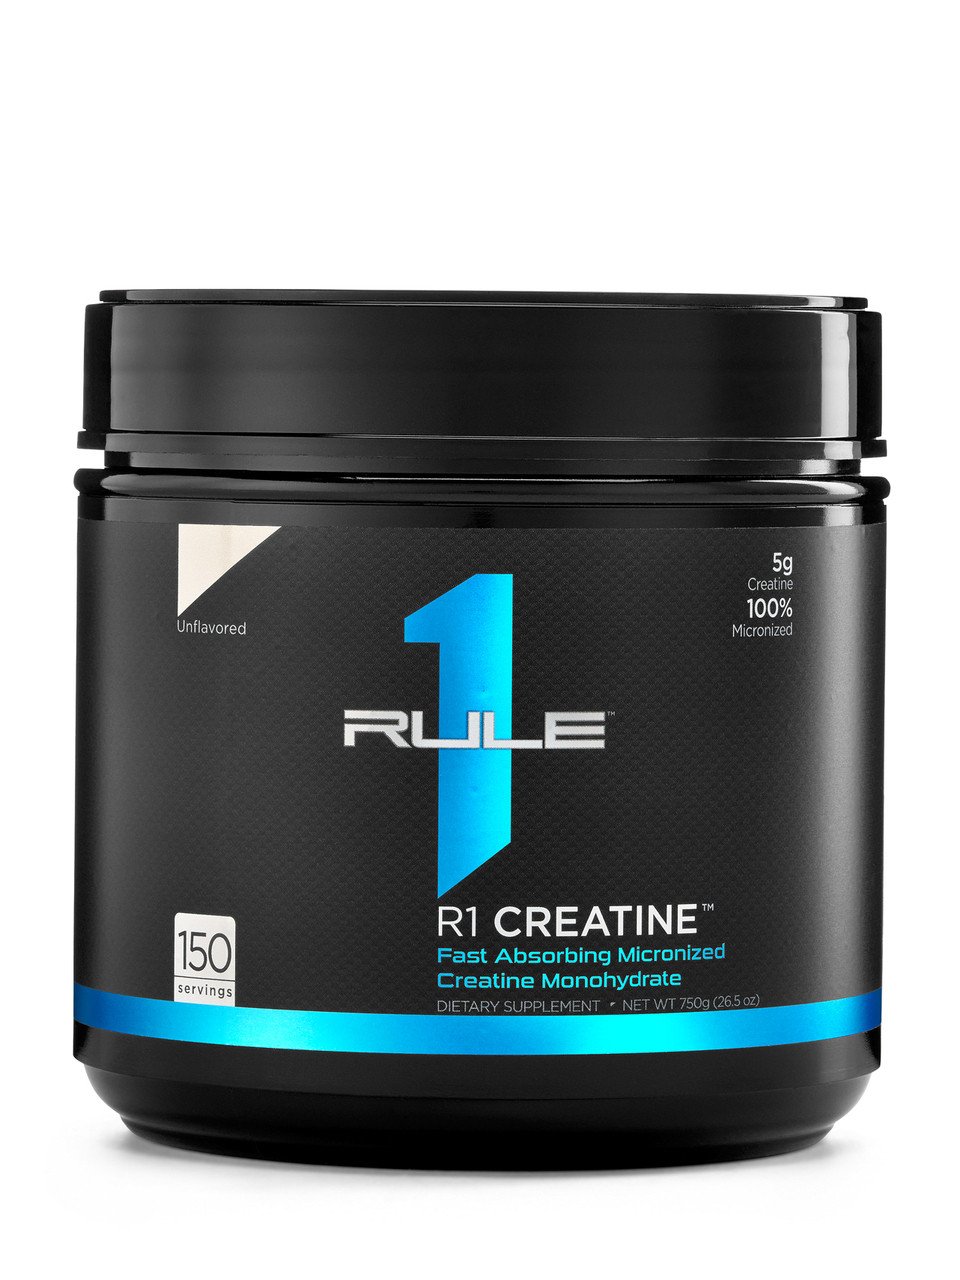 R1 Creatine 750 г - Unflavored,  мл, Rule One Proteins. Креатин